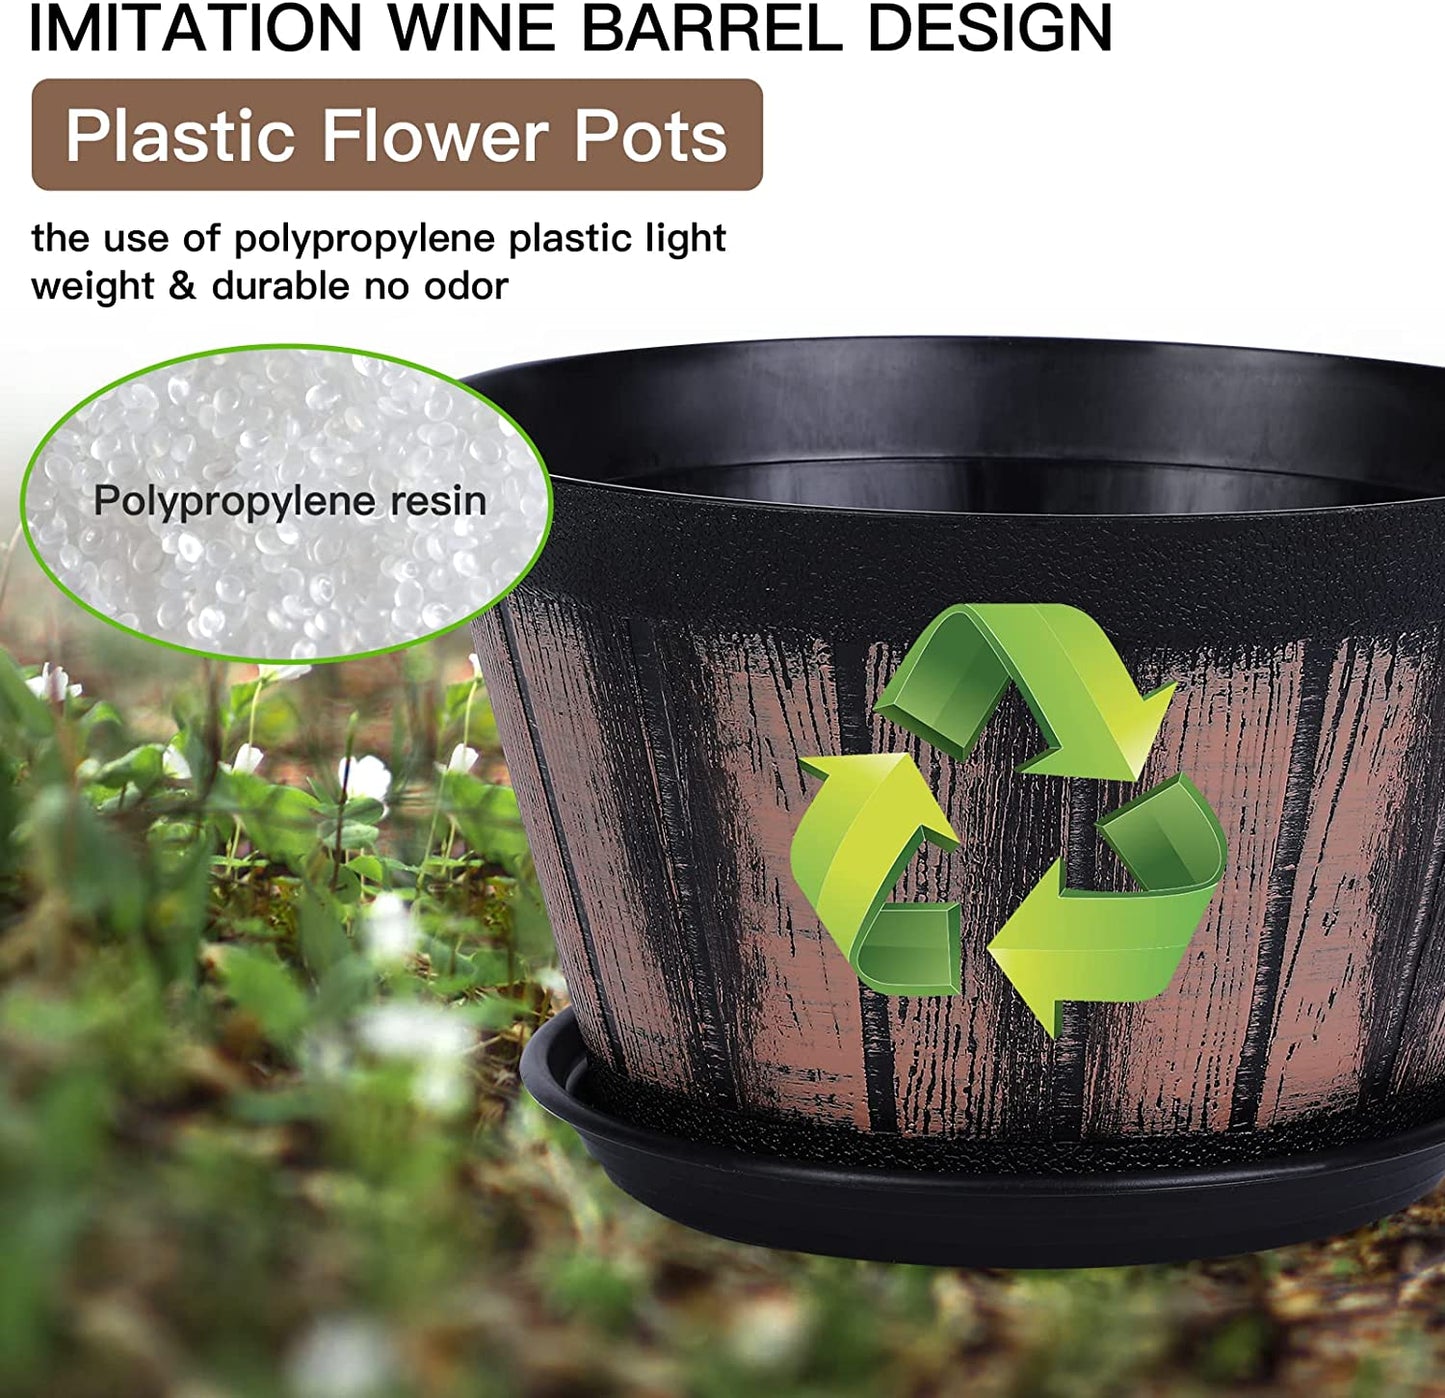 Plant Pots Set of 4 Pack 8 inch.Whiskey Barrel Planters with Drainage Holes and Saucer.Plastic Decoration Flower Pots Imitation Wine Barrel Design,Canbe